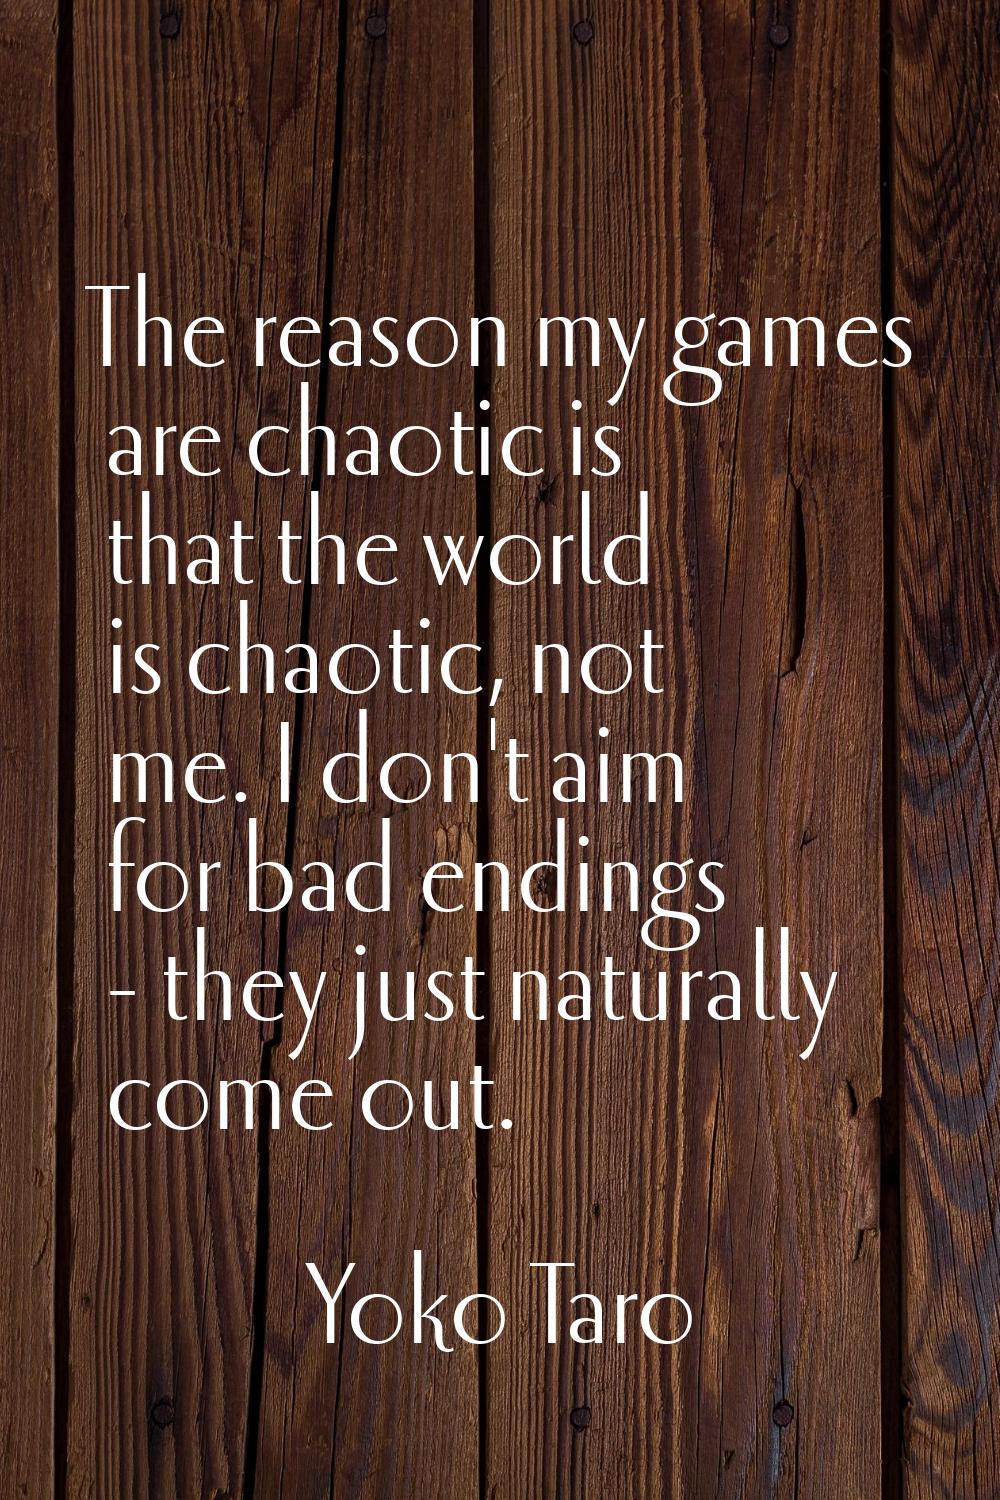 The reason my games are chaotic is that the world is chaotic, not me. I don't aim for bad endings -